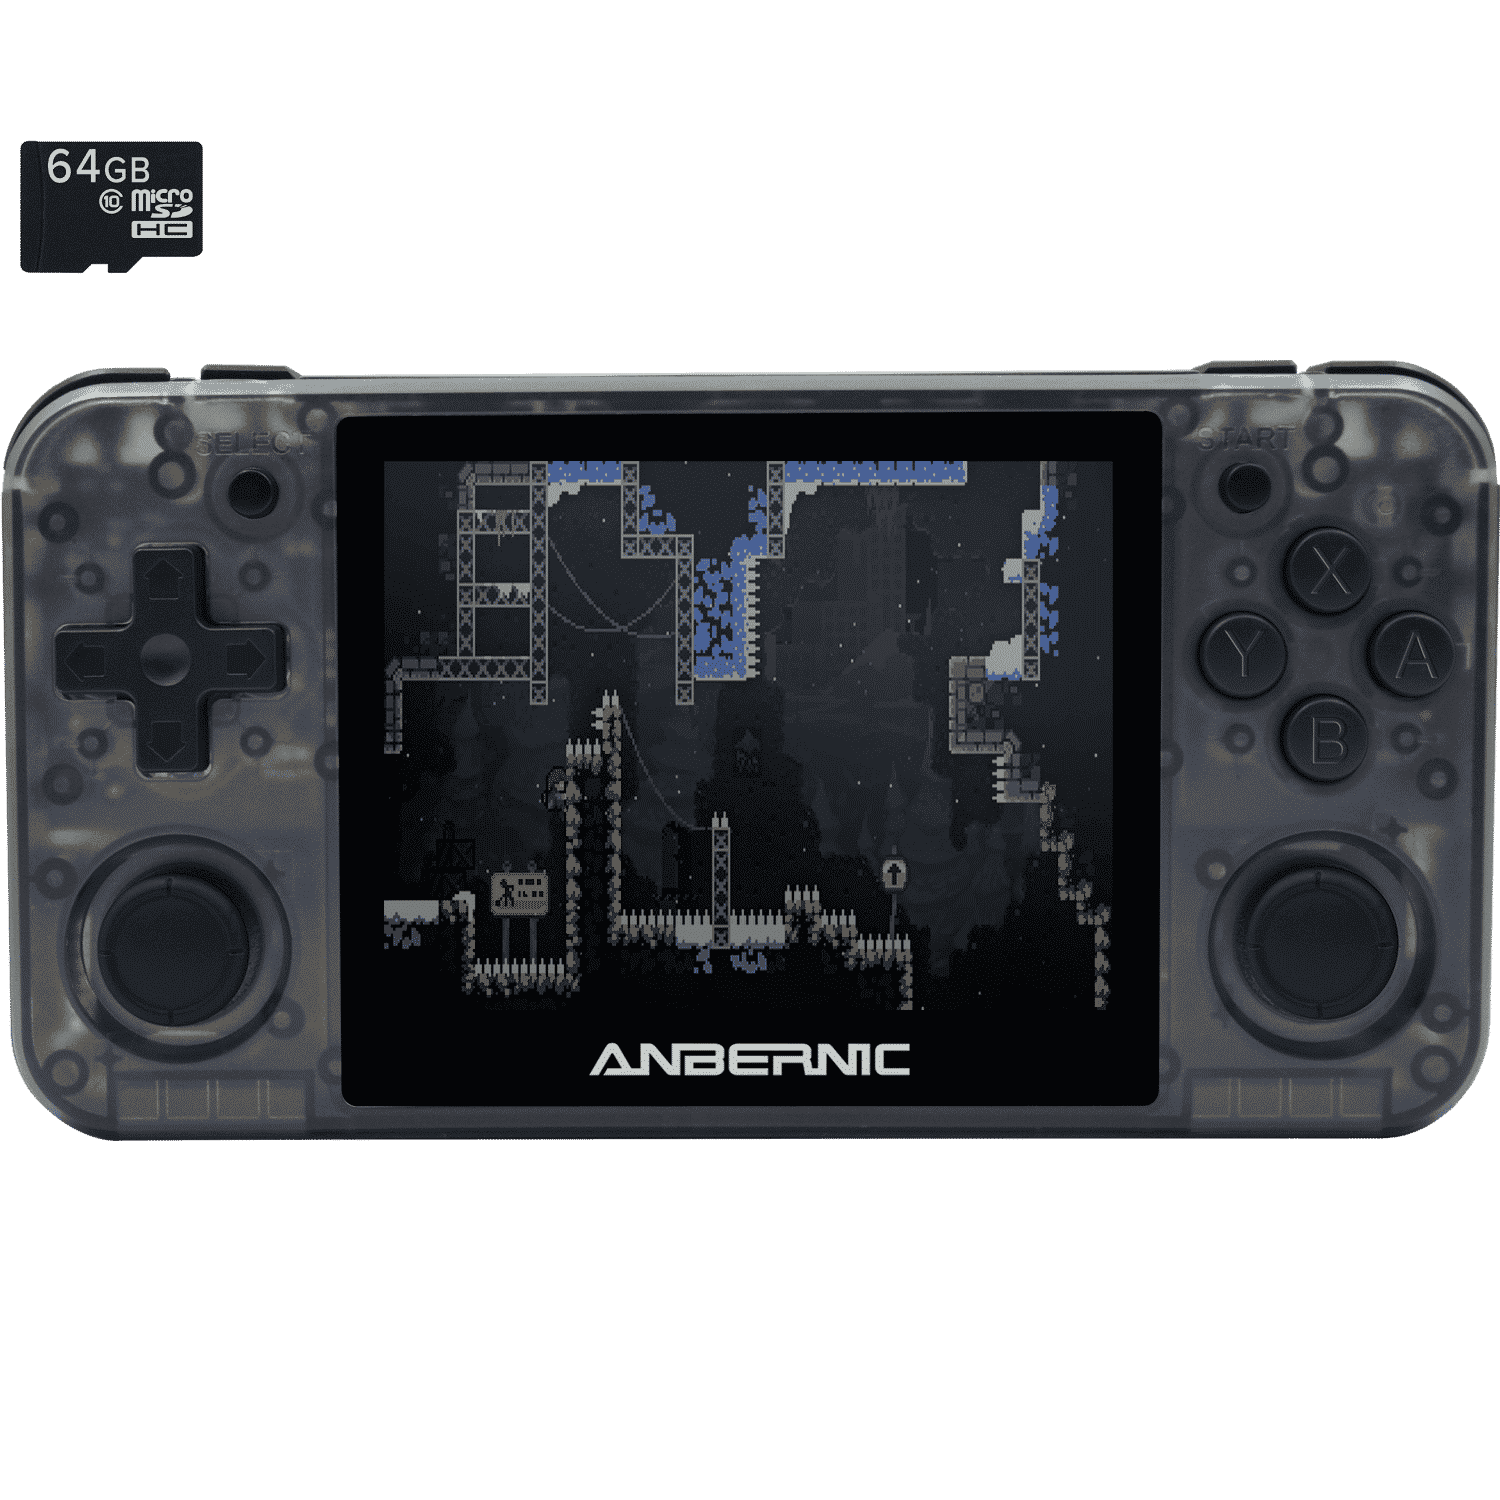 RG350P Handheld Game Console by Anbernic